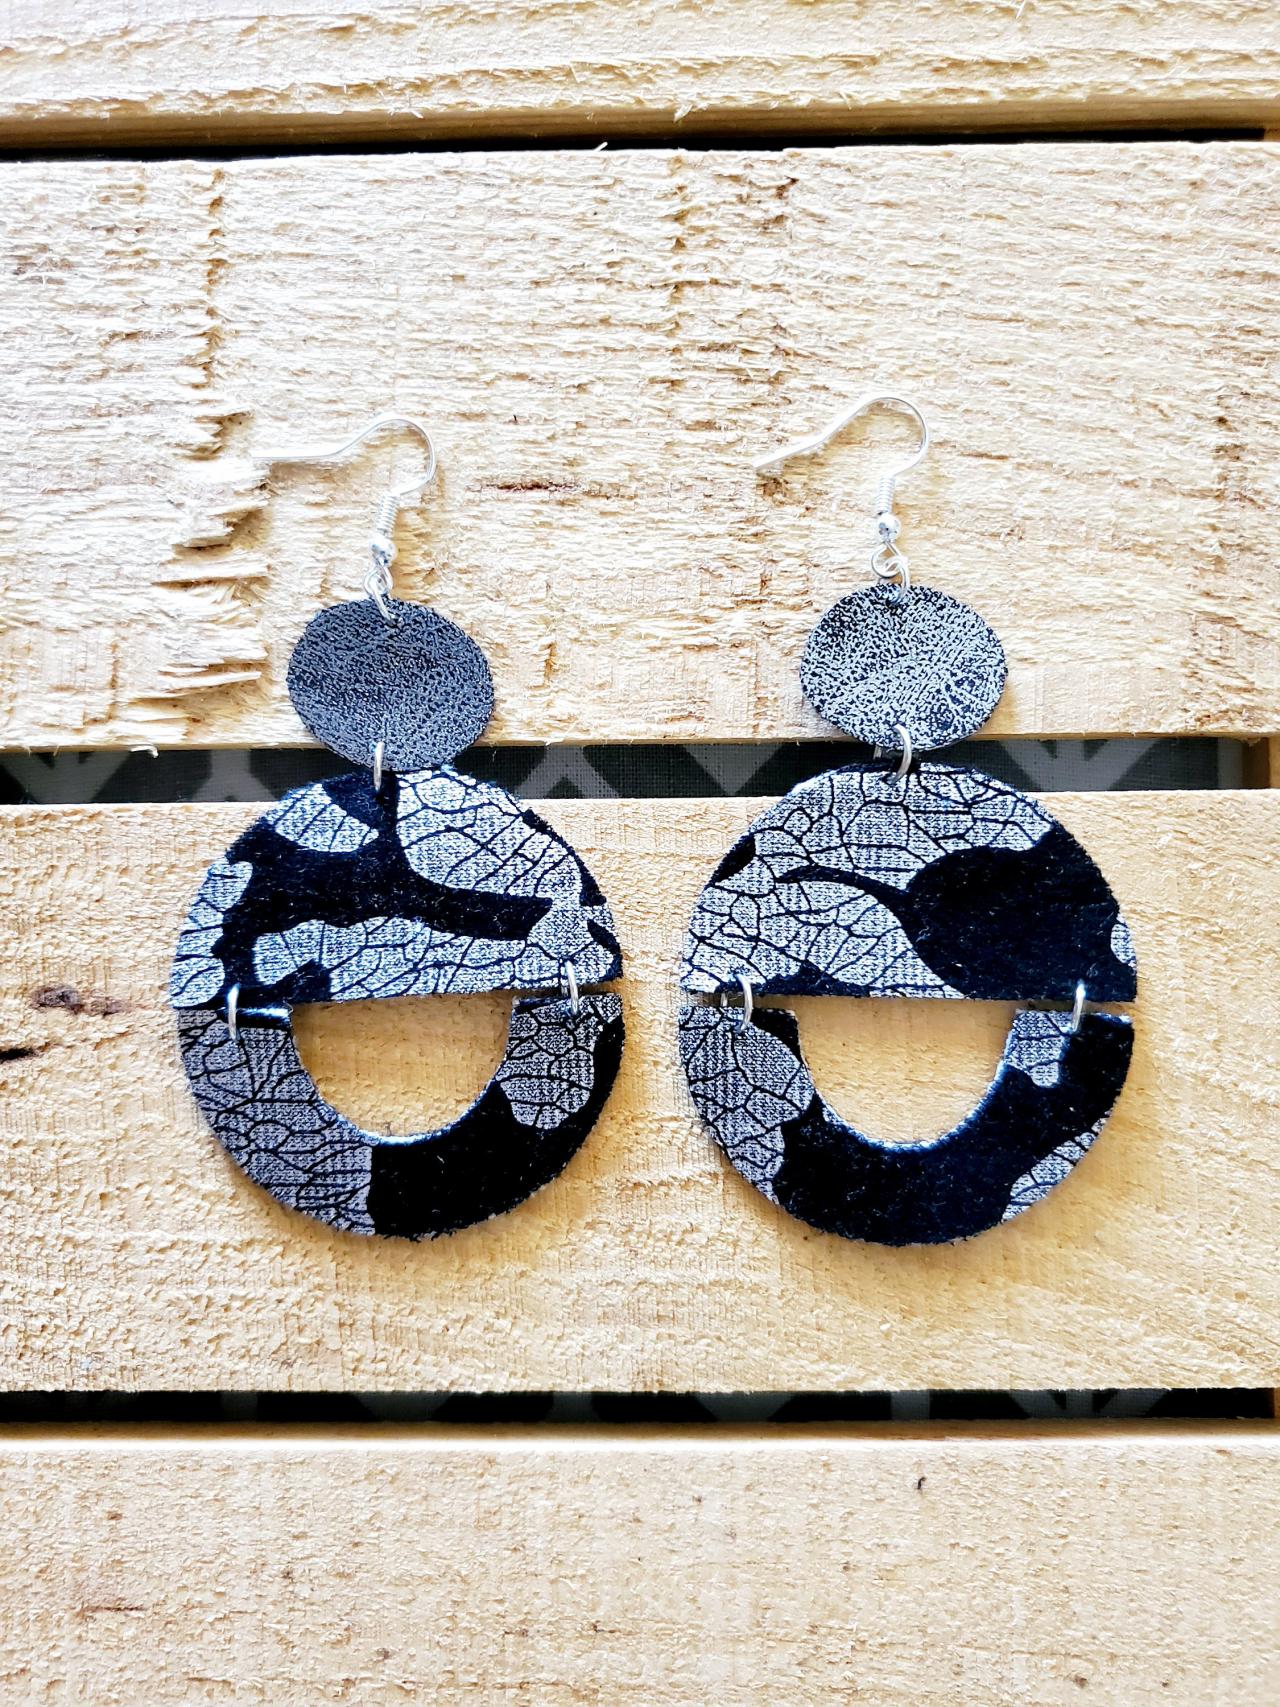 Black And Silver Distressed Leather Earrings, Velvet And Leather Earrings, Rustic Leather Earrings, Everyday Earrings, Silver Dangles, Boho